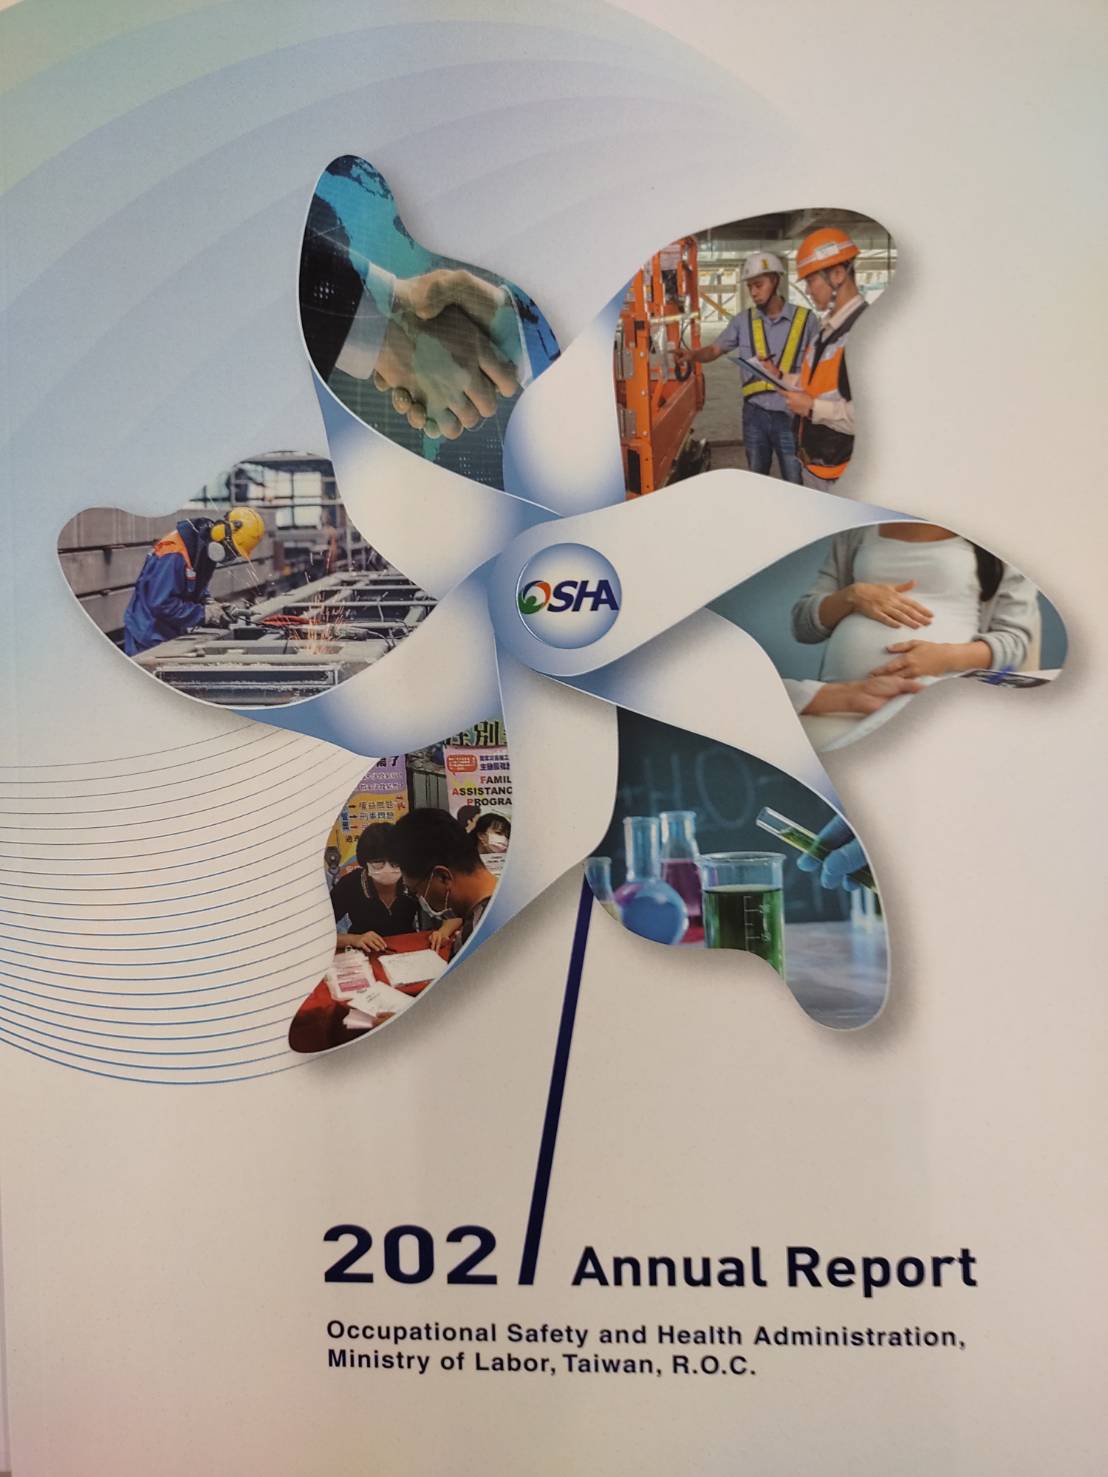  Occupational Safety and Health Administration 2021 Annual Report